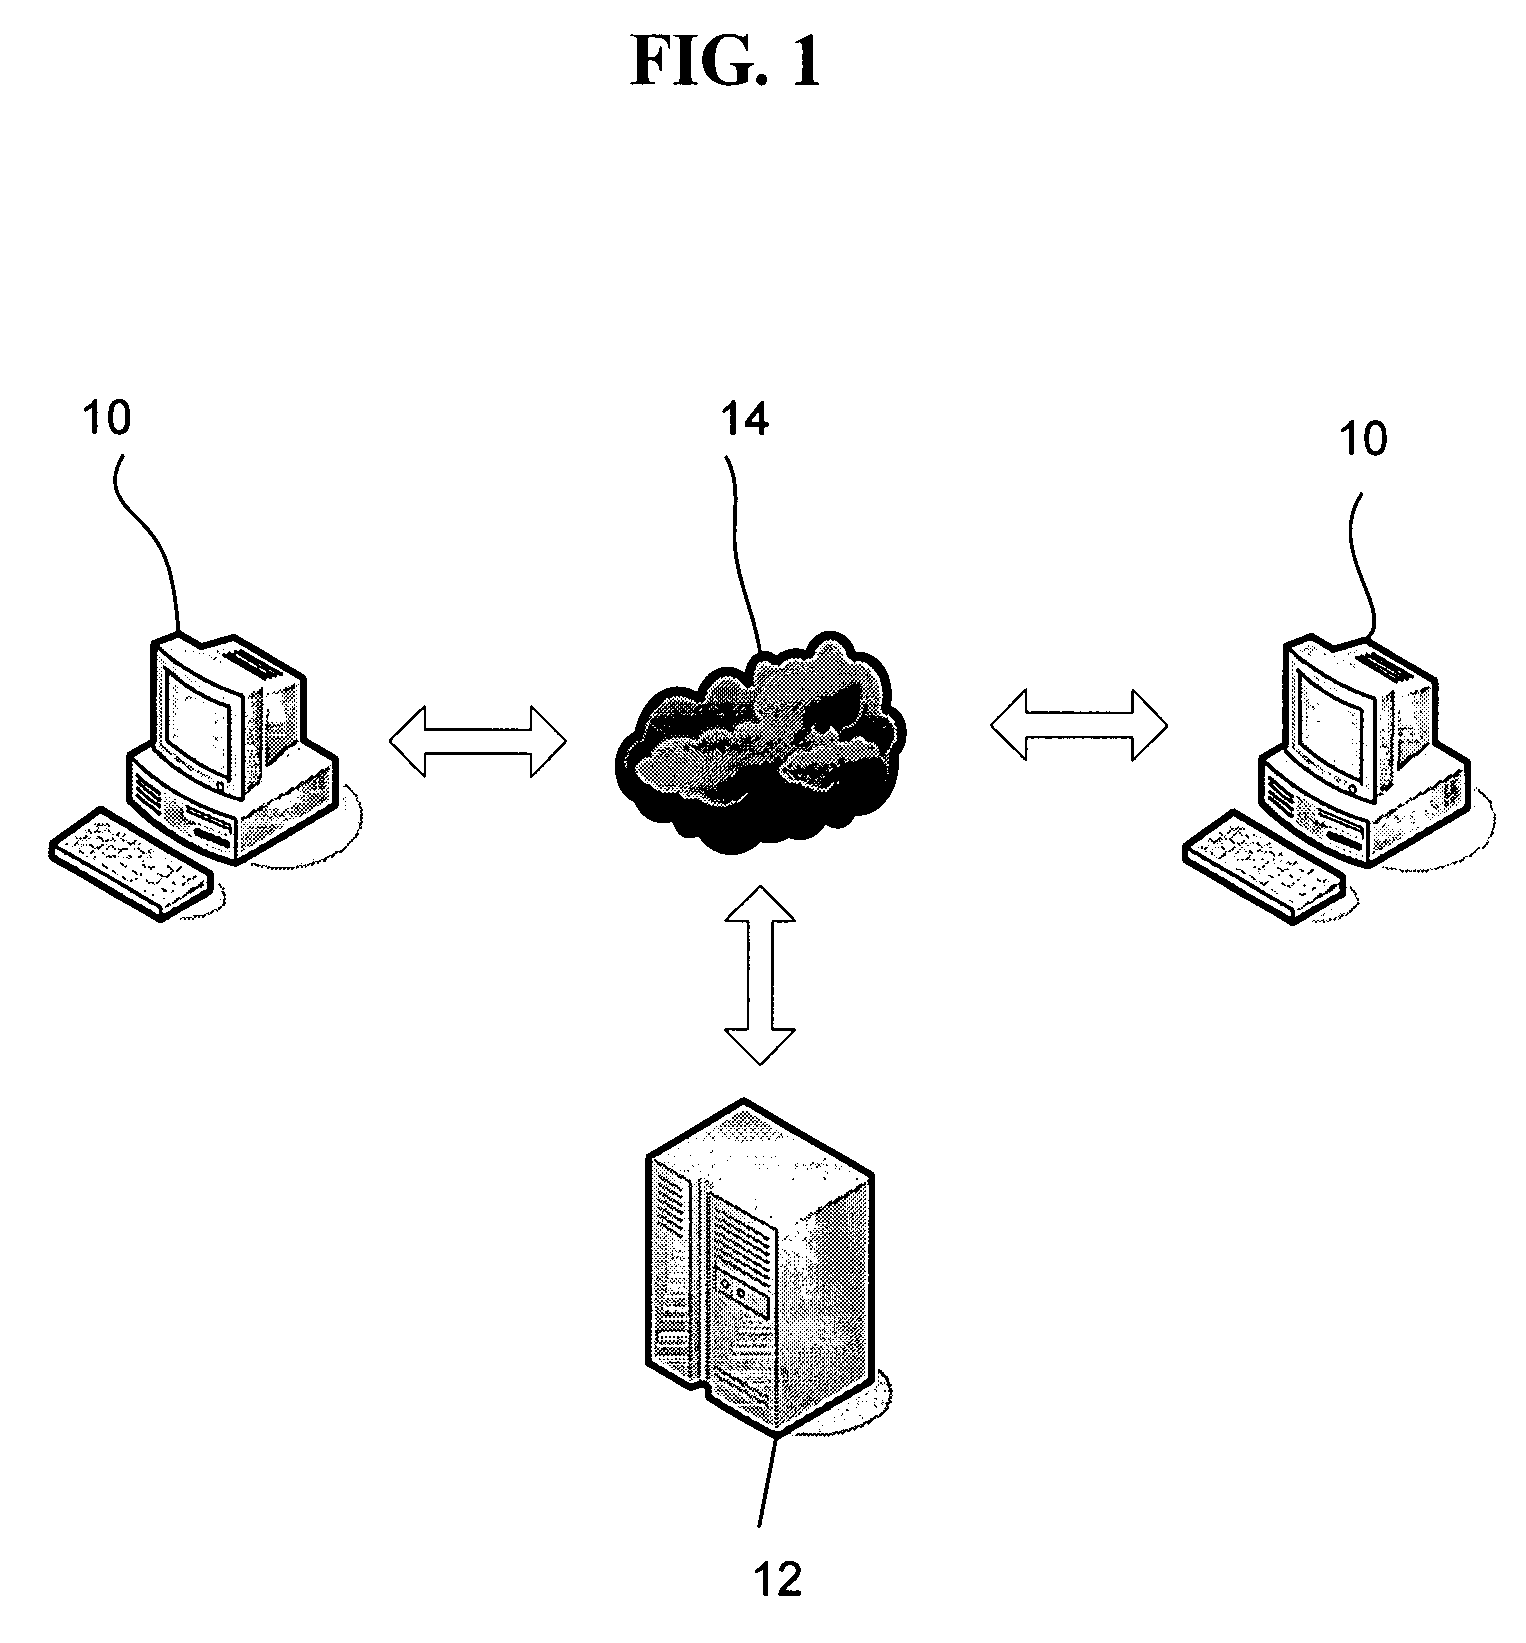 Data backup, storage, transfer, and retrieval system, method and computer program product